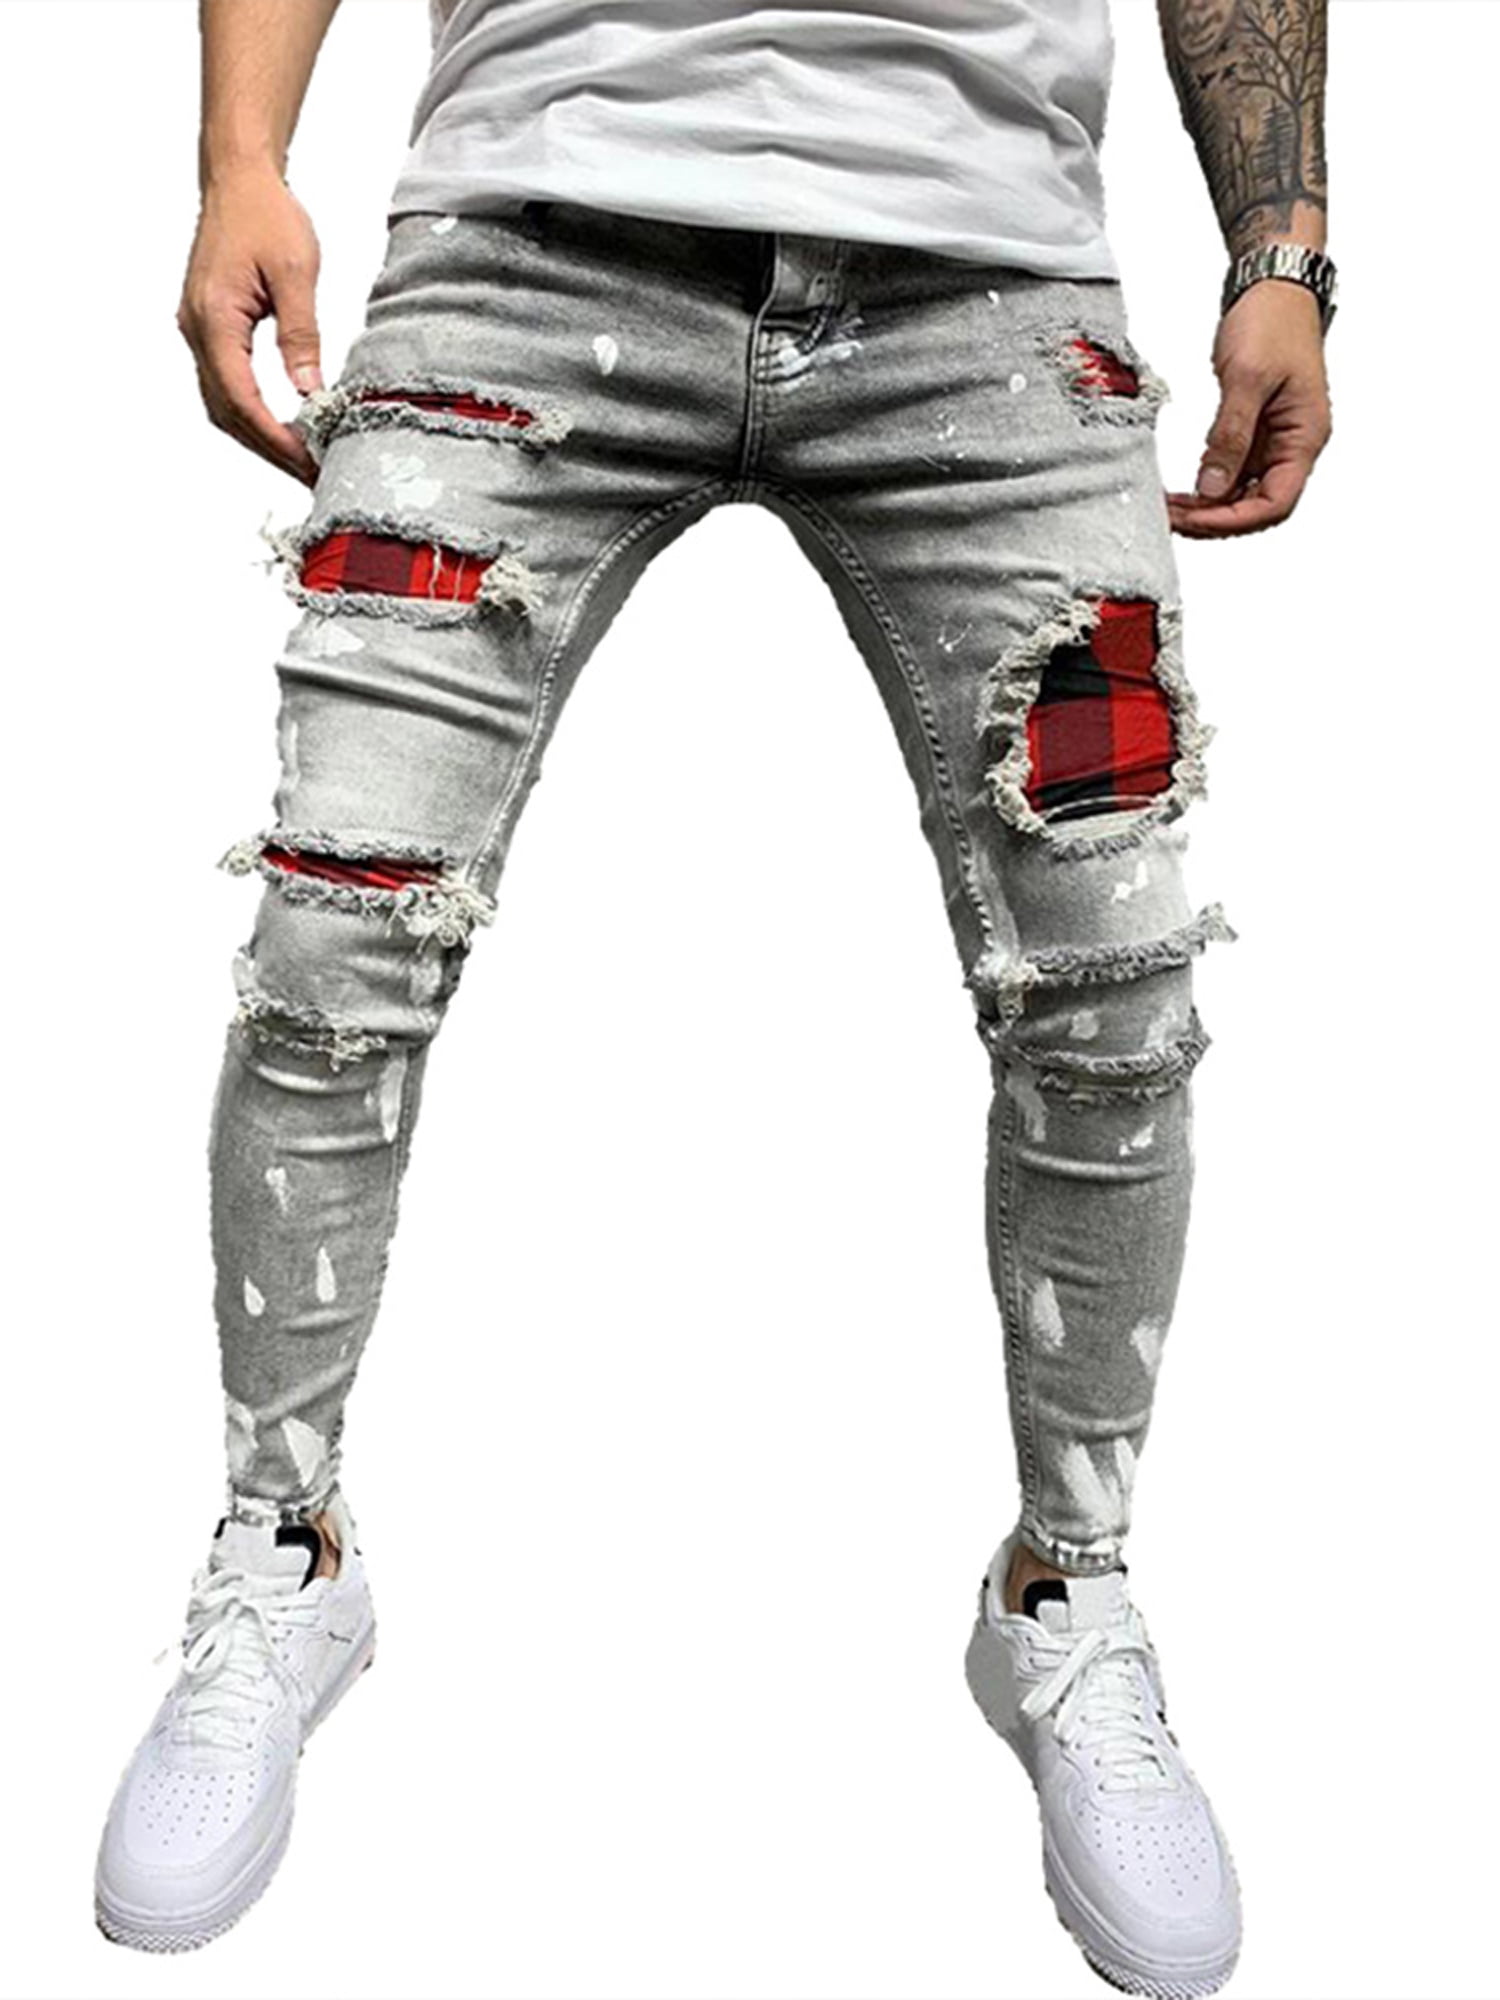 Men's Casual Denim Ripped Cropped Jeans Jogger Pants Elastic Skinny Trousers US